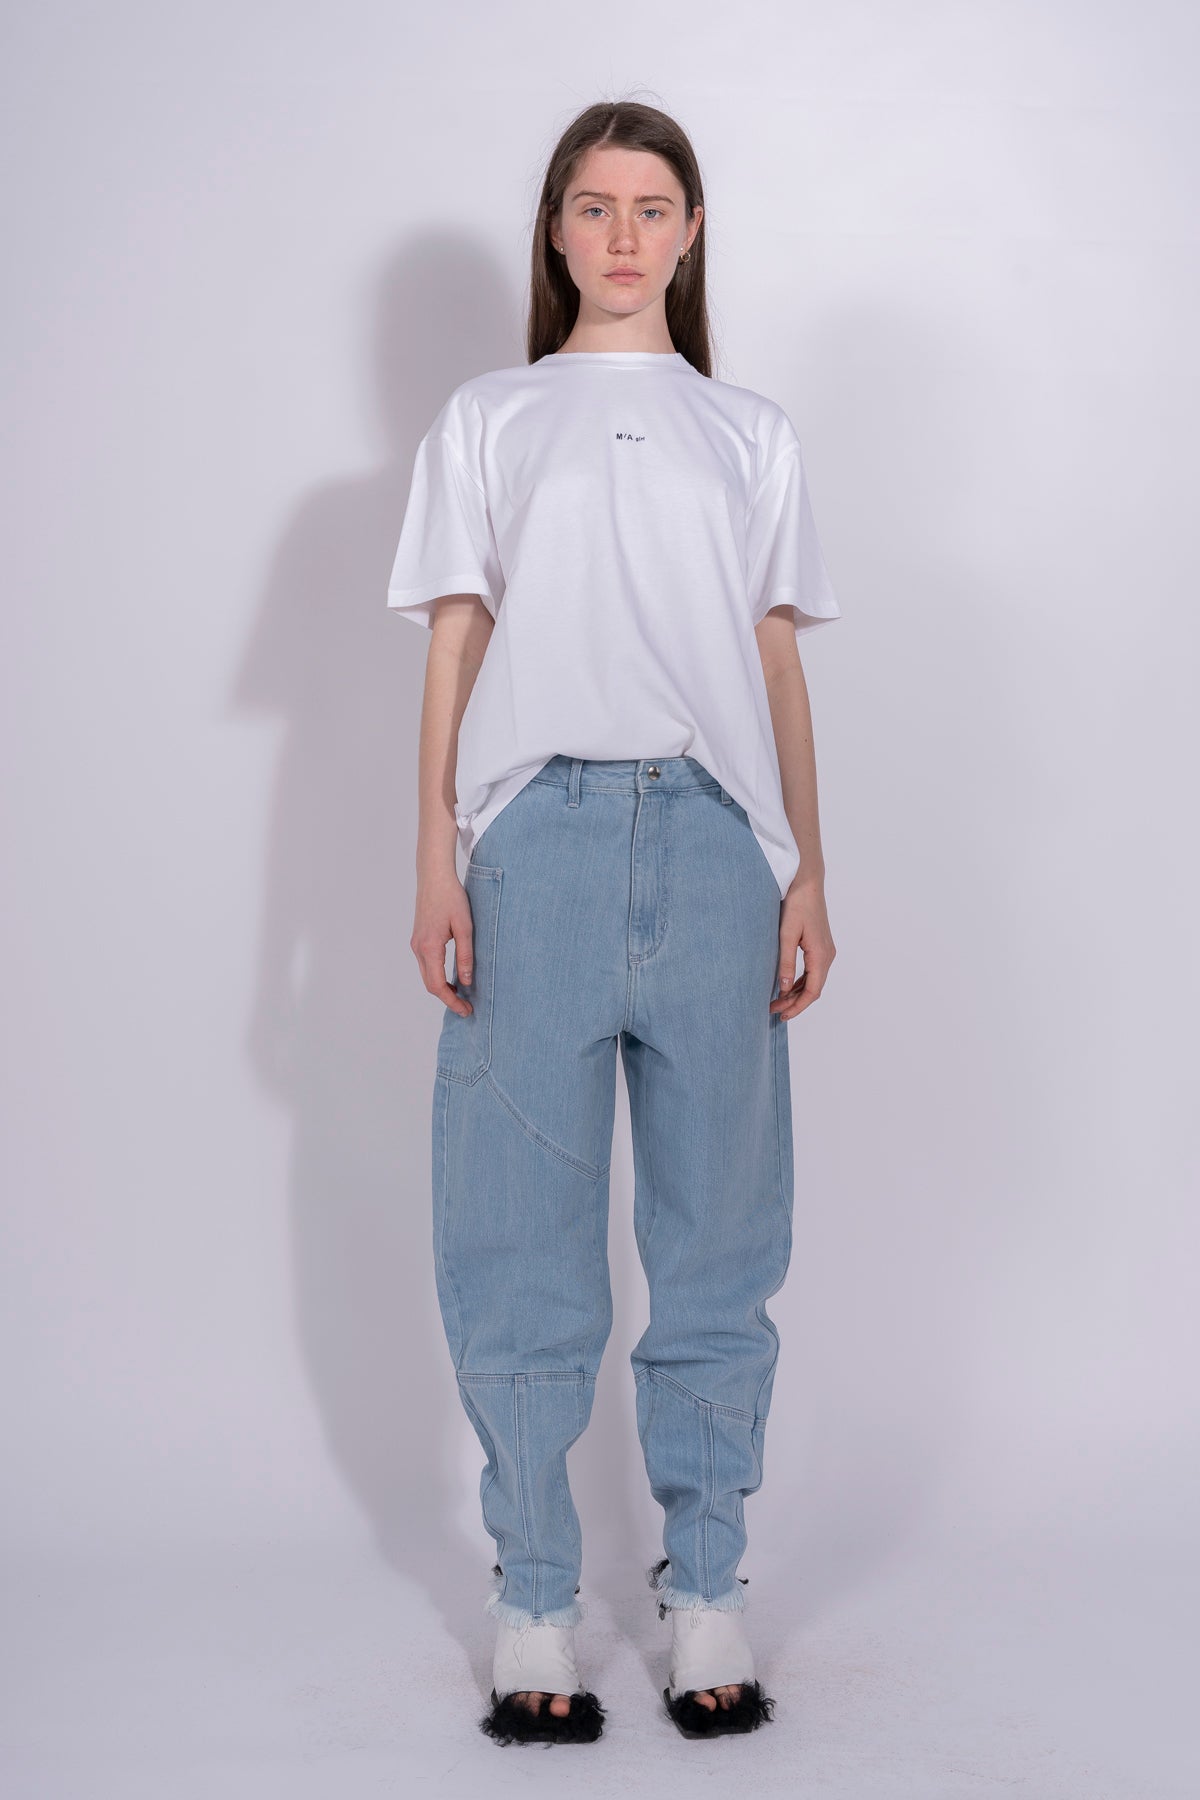 BLUE PANELLED JEANS – MARQUES ' ALMEIDA